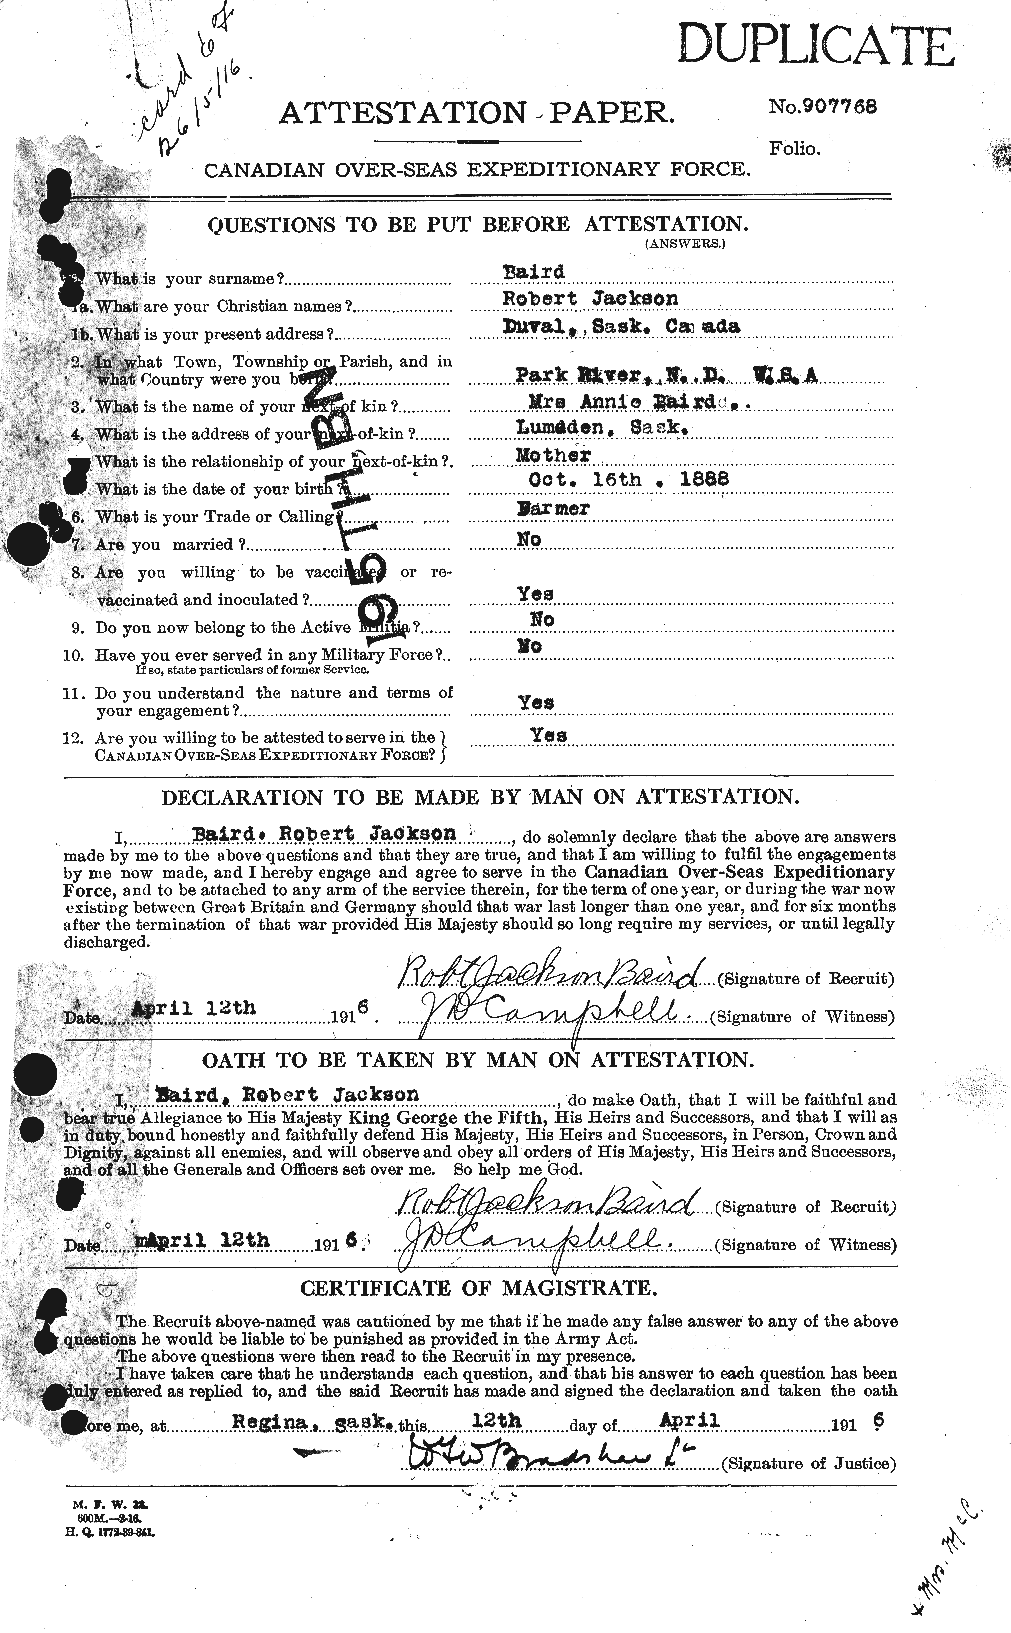 Personnel Records of the First World War - CEF 226565a